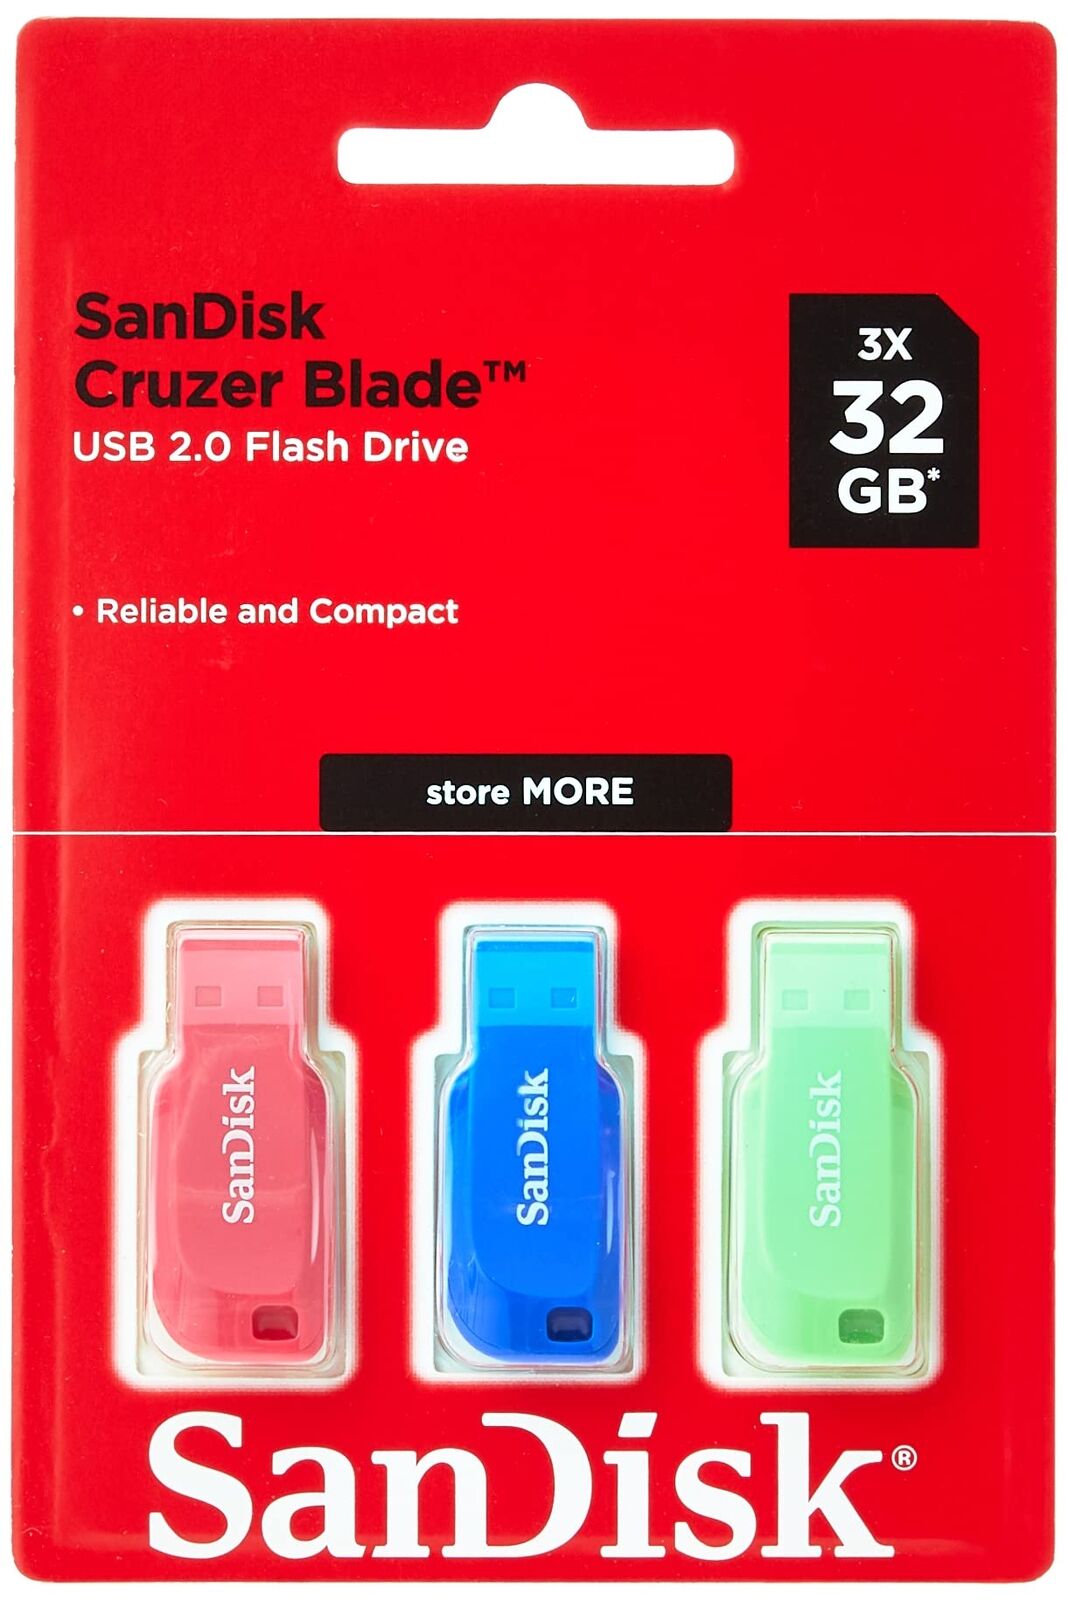 SanDisk 32GB Cruzer Blade USB Flash Drive , Blue/Pink/Green, 3count(Pack of 1) B